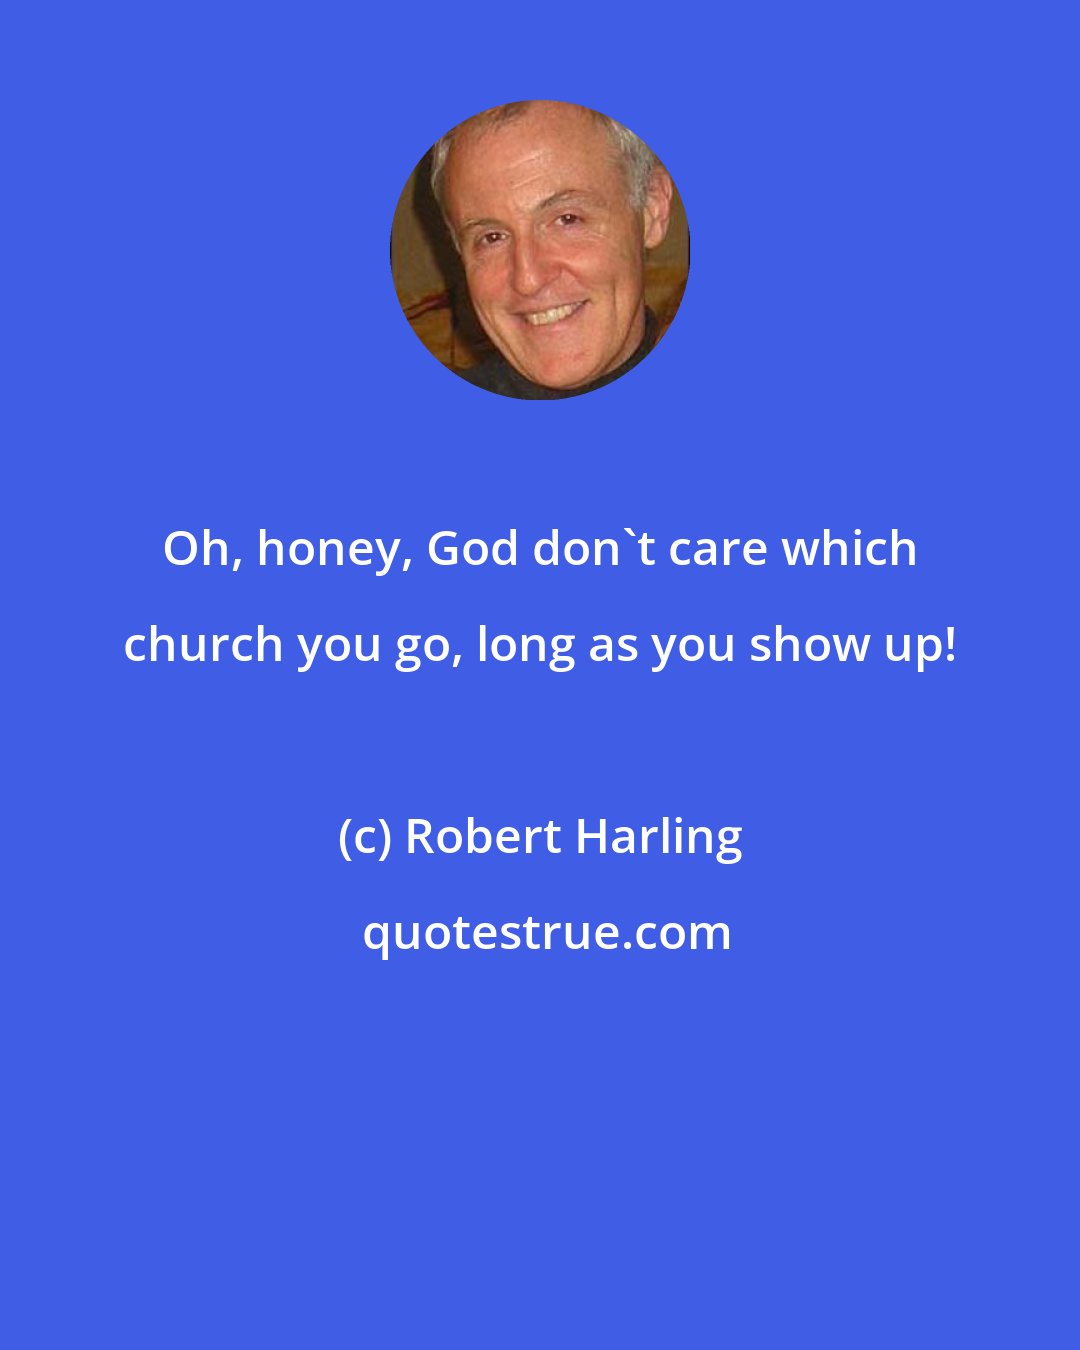 Robert Harling: Oh, honey, God don't care which church you go, long as you show up!